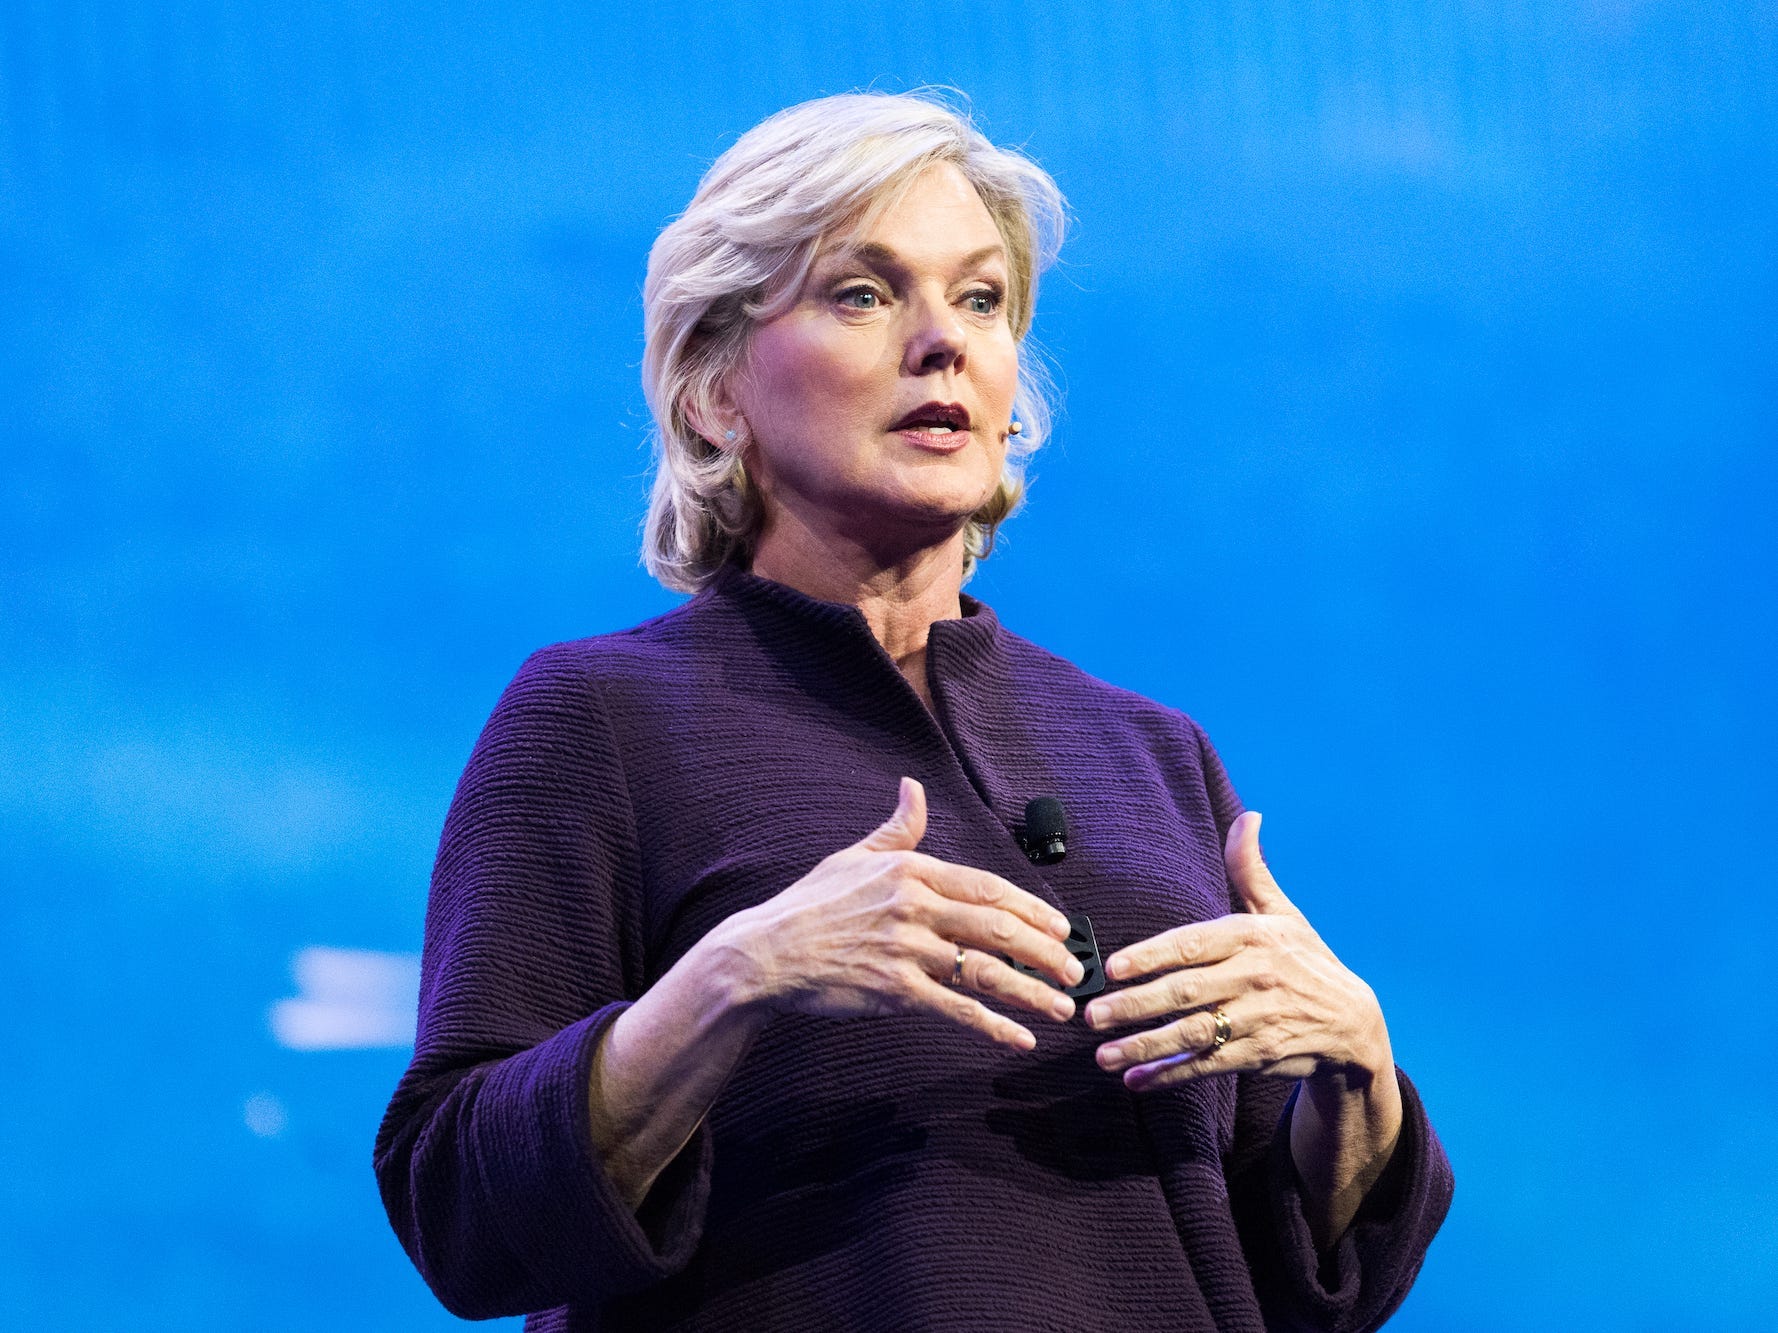 WASHINGTON, DC, UNITED STATES - 2018/03/04: Jennifer Granholm, Former Governor of Michigan, speaking at the AIPAC (American Israel Public Affairs Committee) Policy Conference at the Walter E. Washington Convention Center. (Photo by Michael Brochstein/SOPA Images/LightRocket via Getty Images)